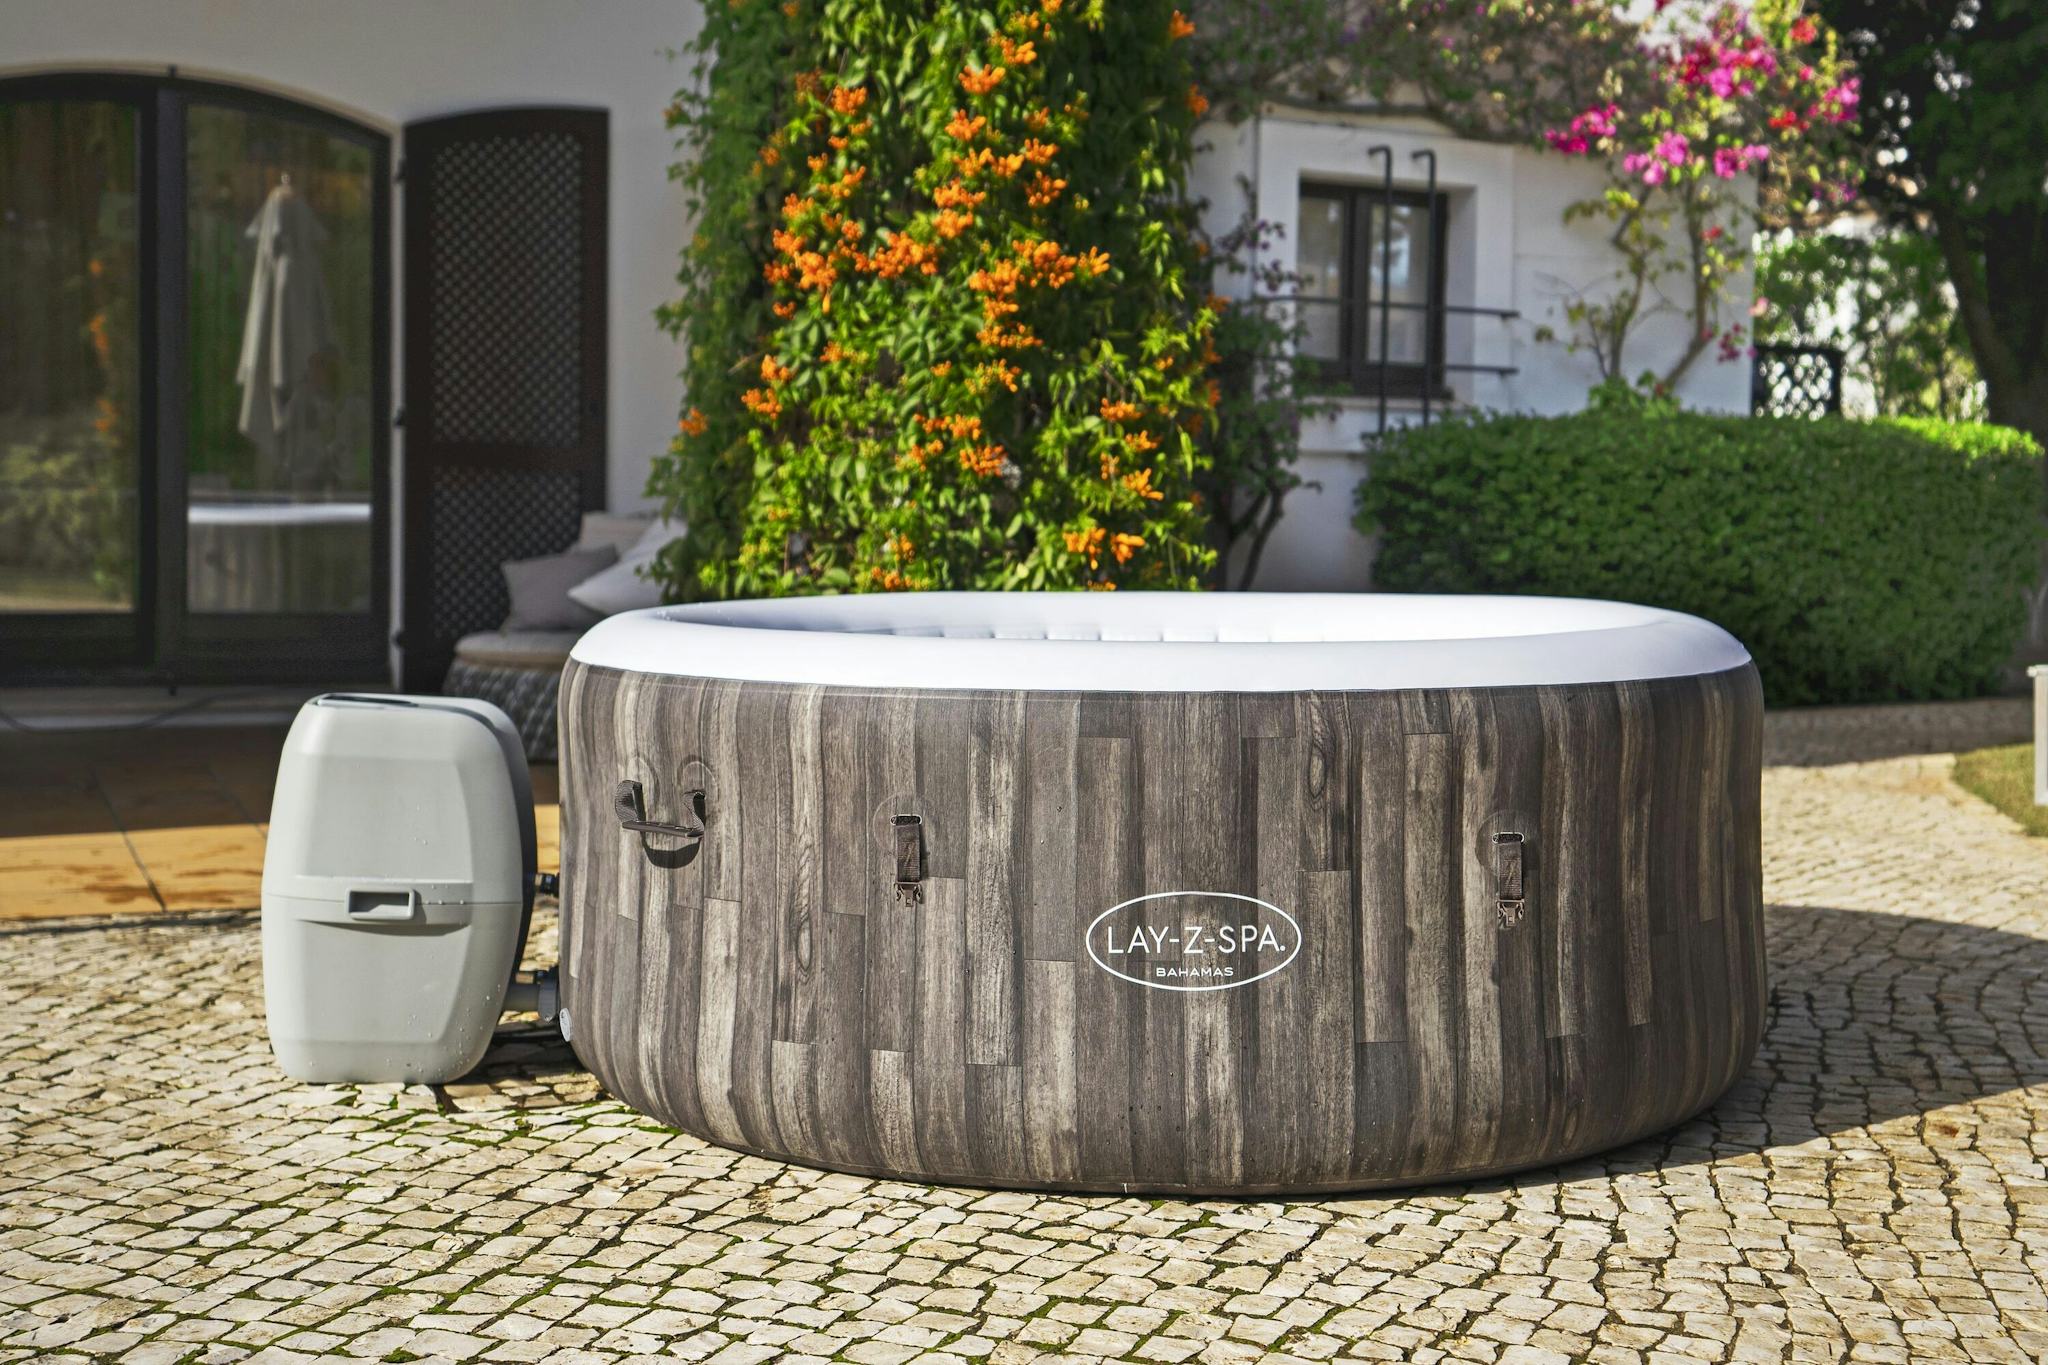 Spas Gonflables Spa gonflable rond Lay-Z-Spa Bahamas Airjet™ 2 - 4 personnes Bestway 7